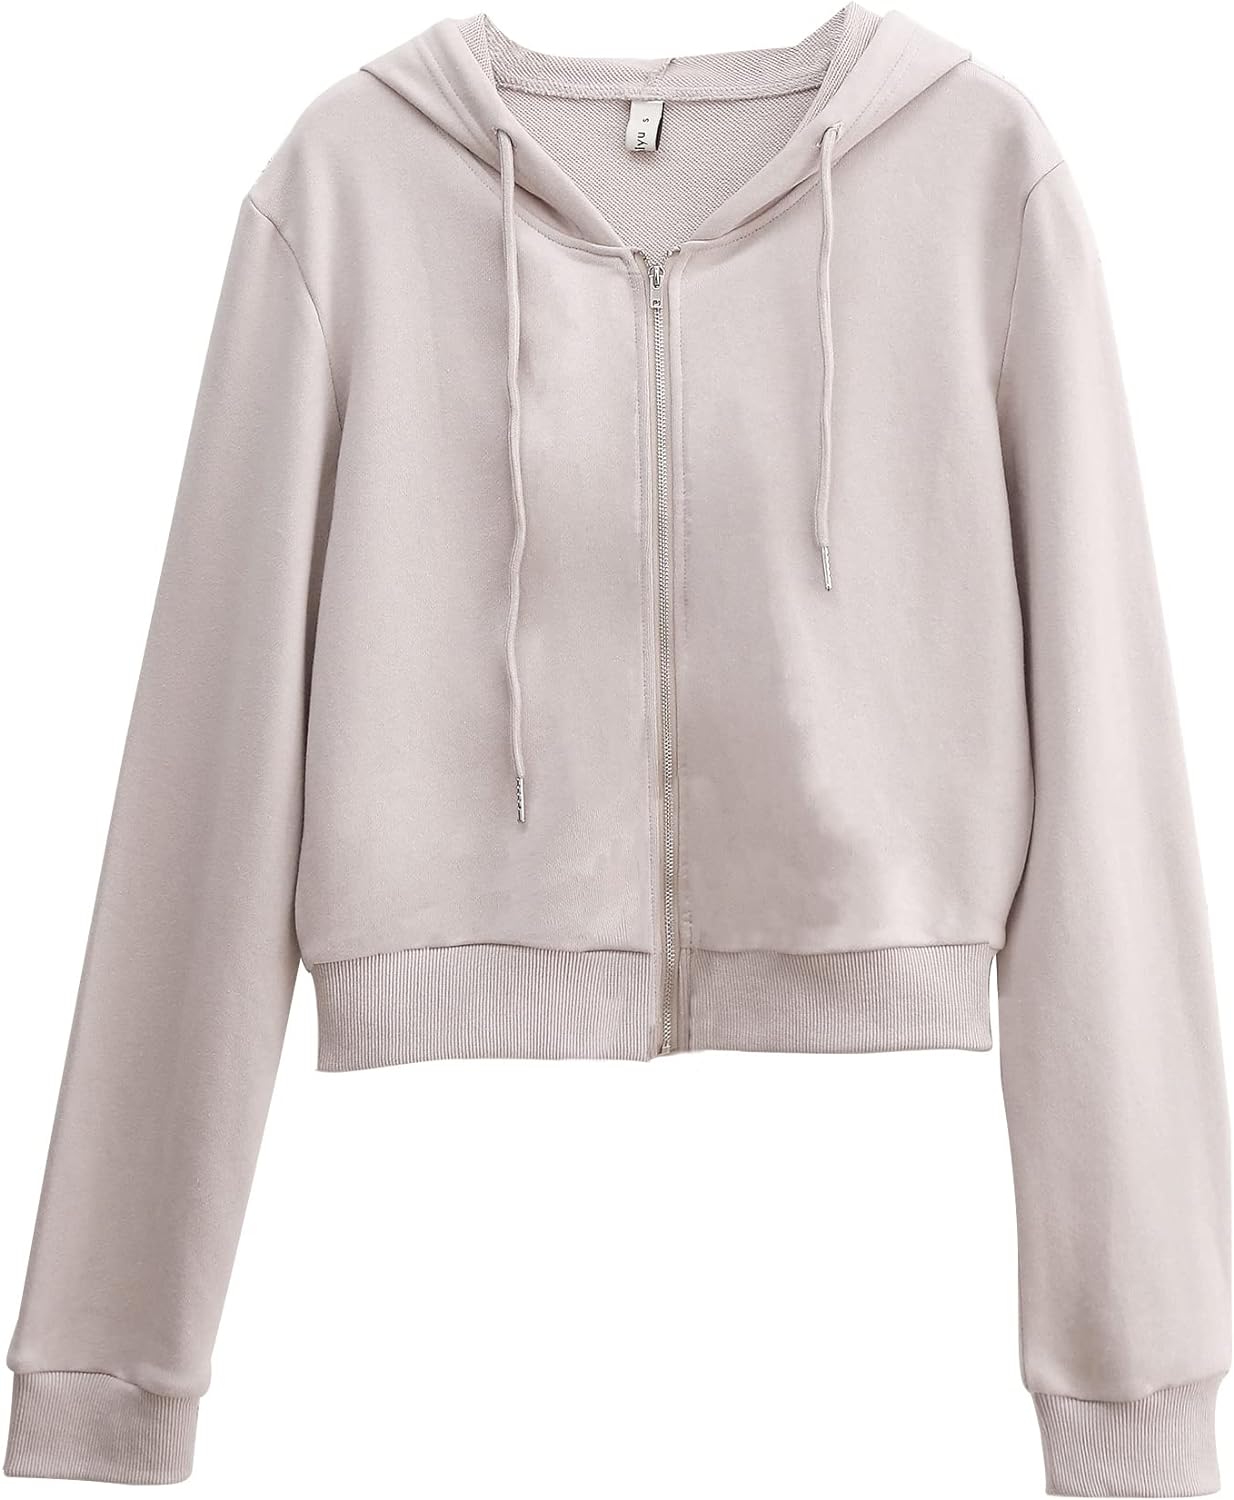 NTG Fad Light Grey / Small Women's Cropped Zip up Hoodie with Drawstring Hooded